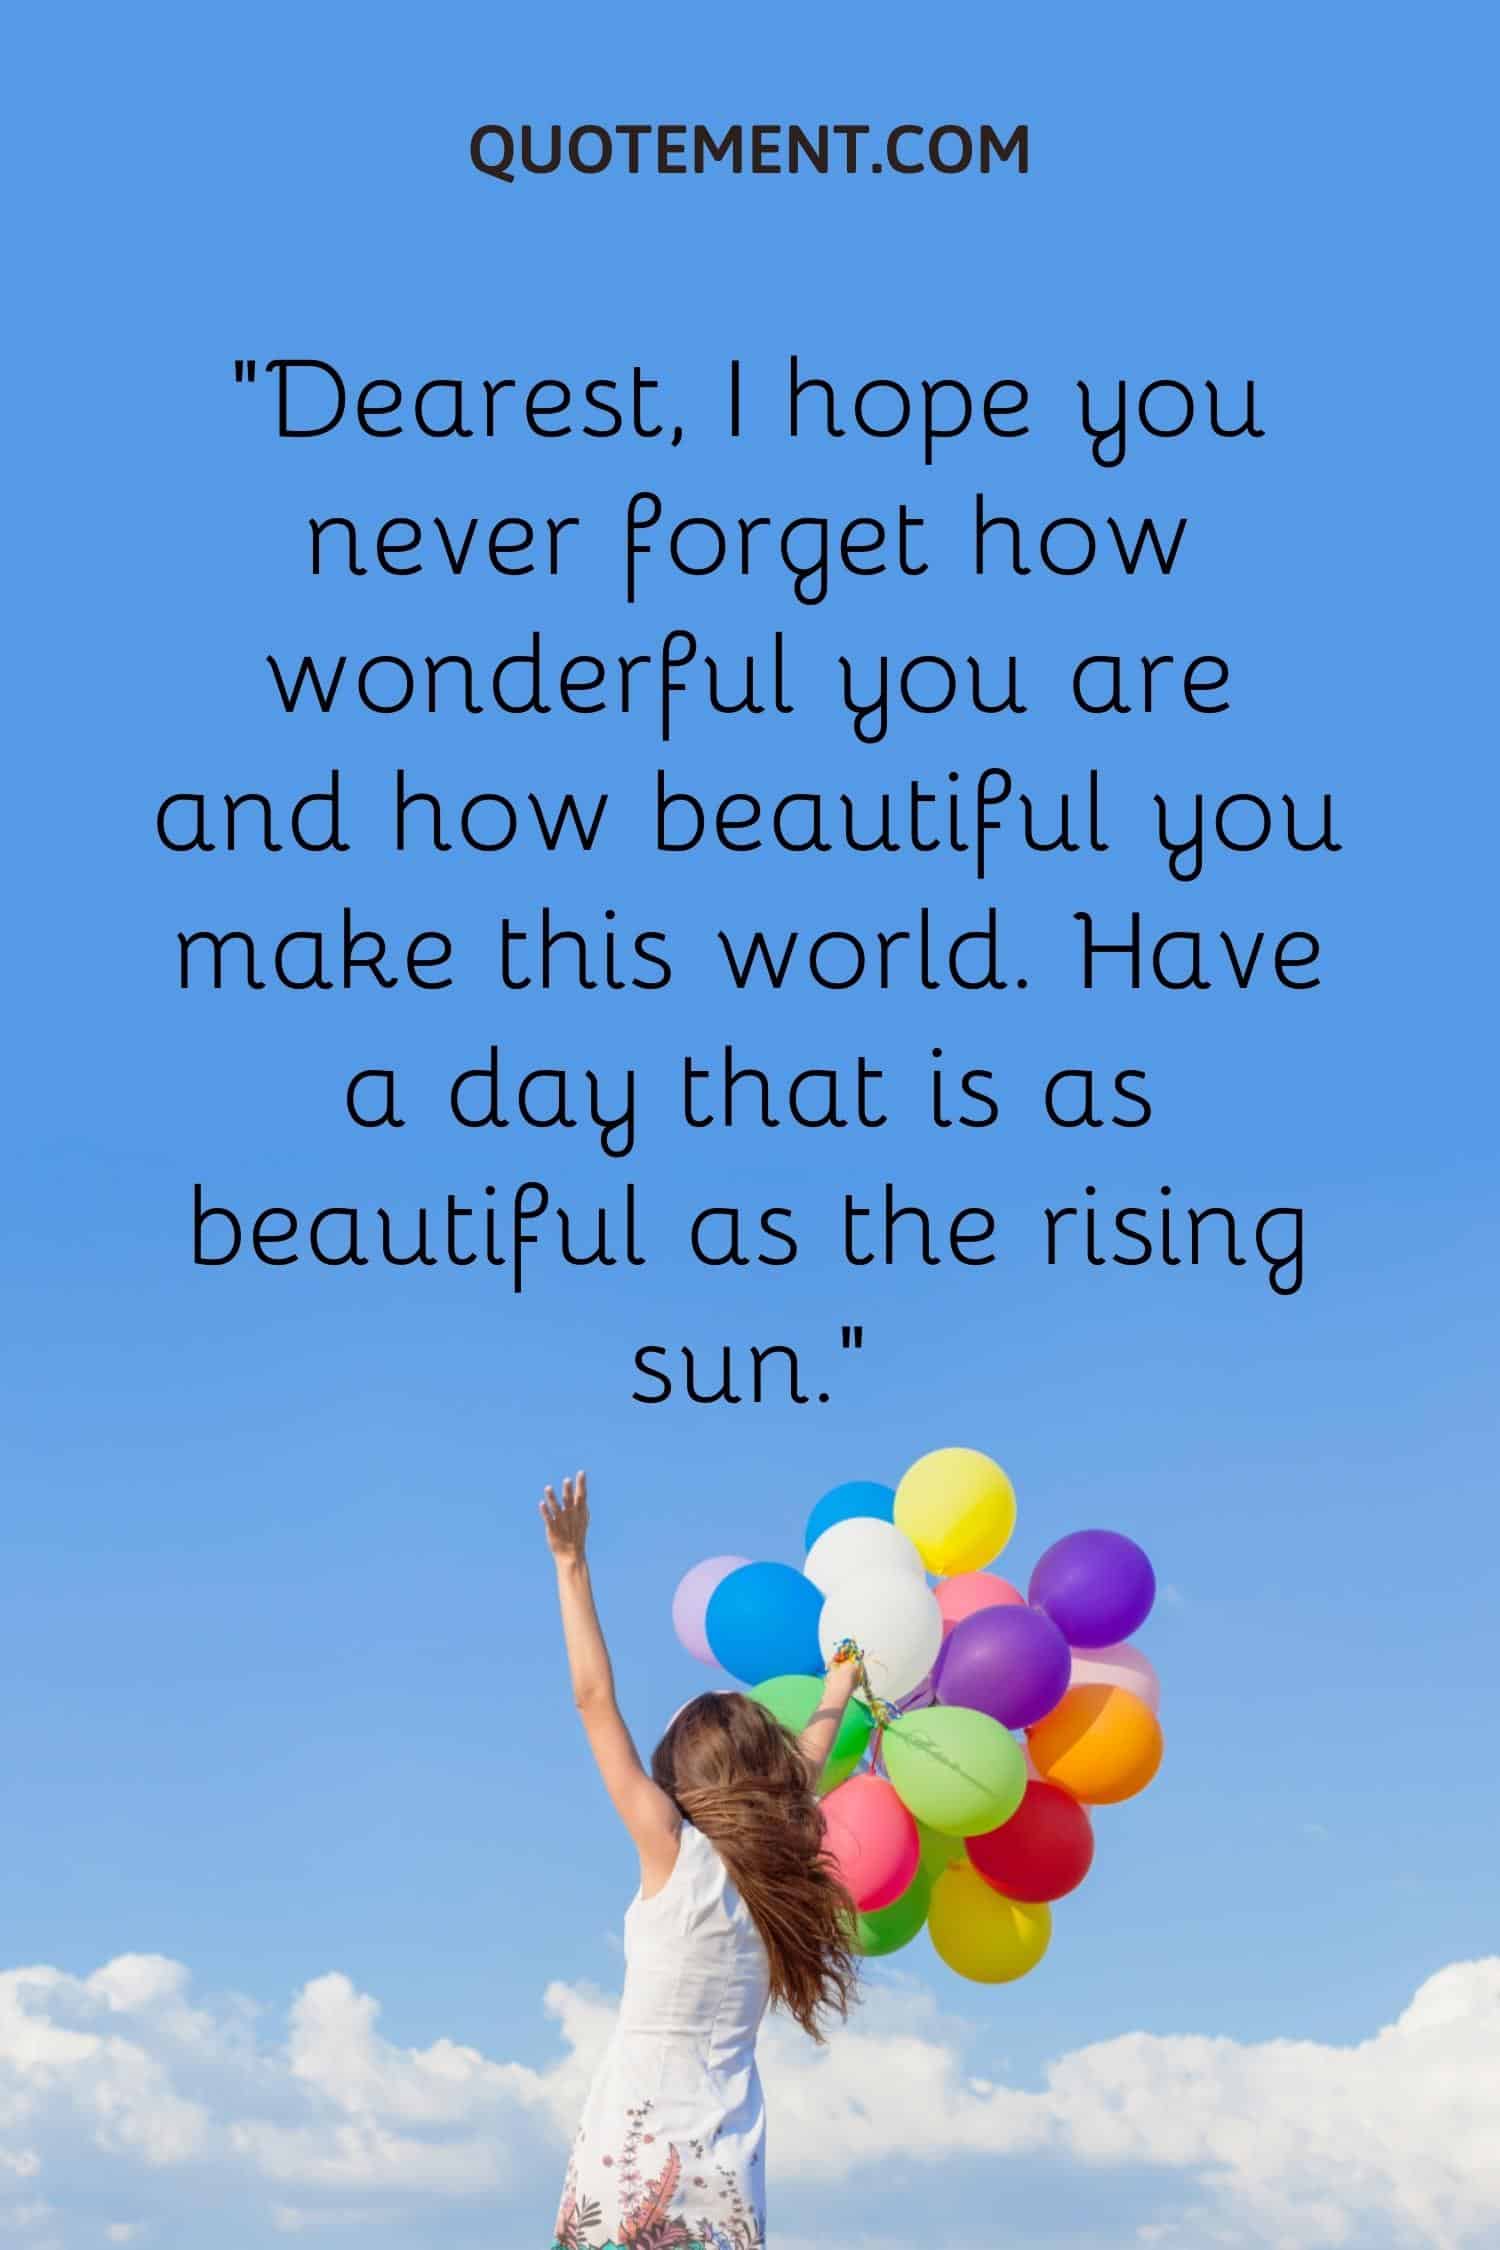 Dearest, I hope you never forget how wonderful you are and how beautiful you make this world.